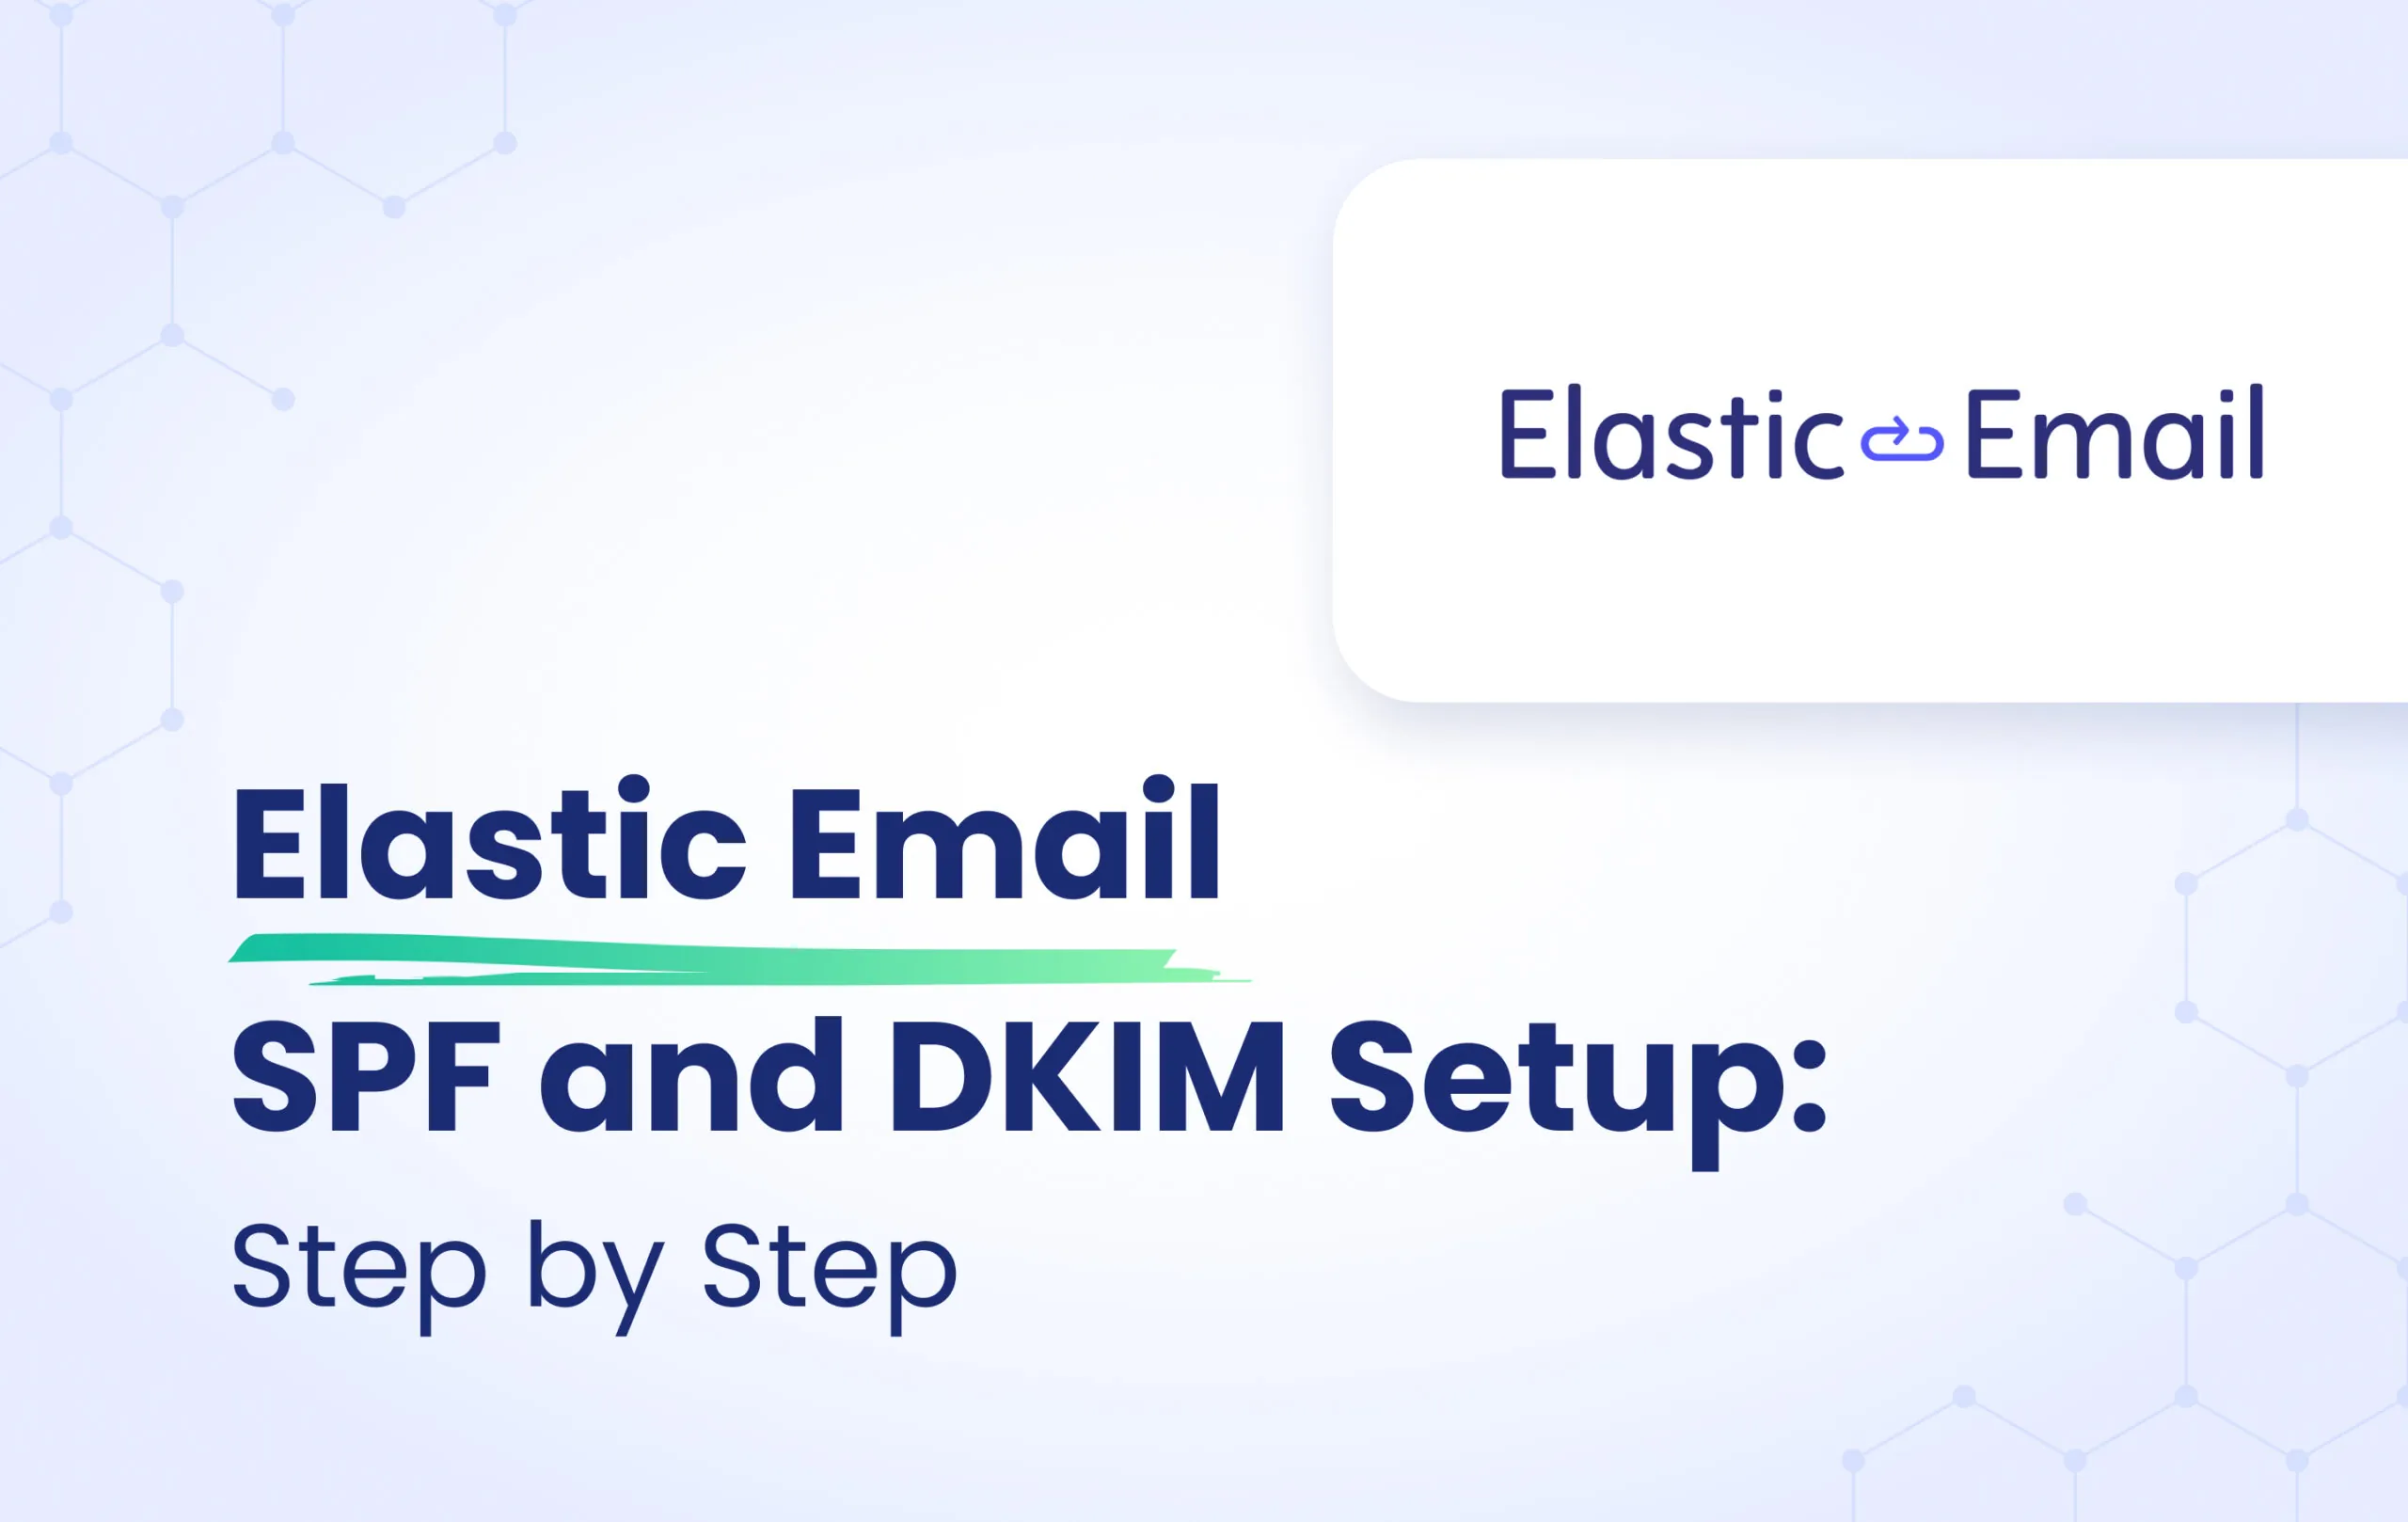 Elastic Email SPF and DKIM Configuration: Step-by-Step featured image